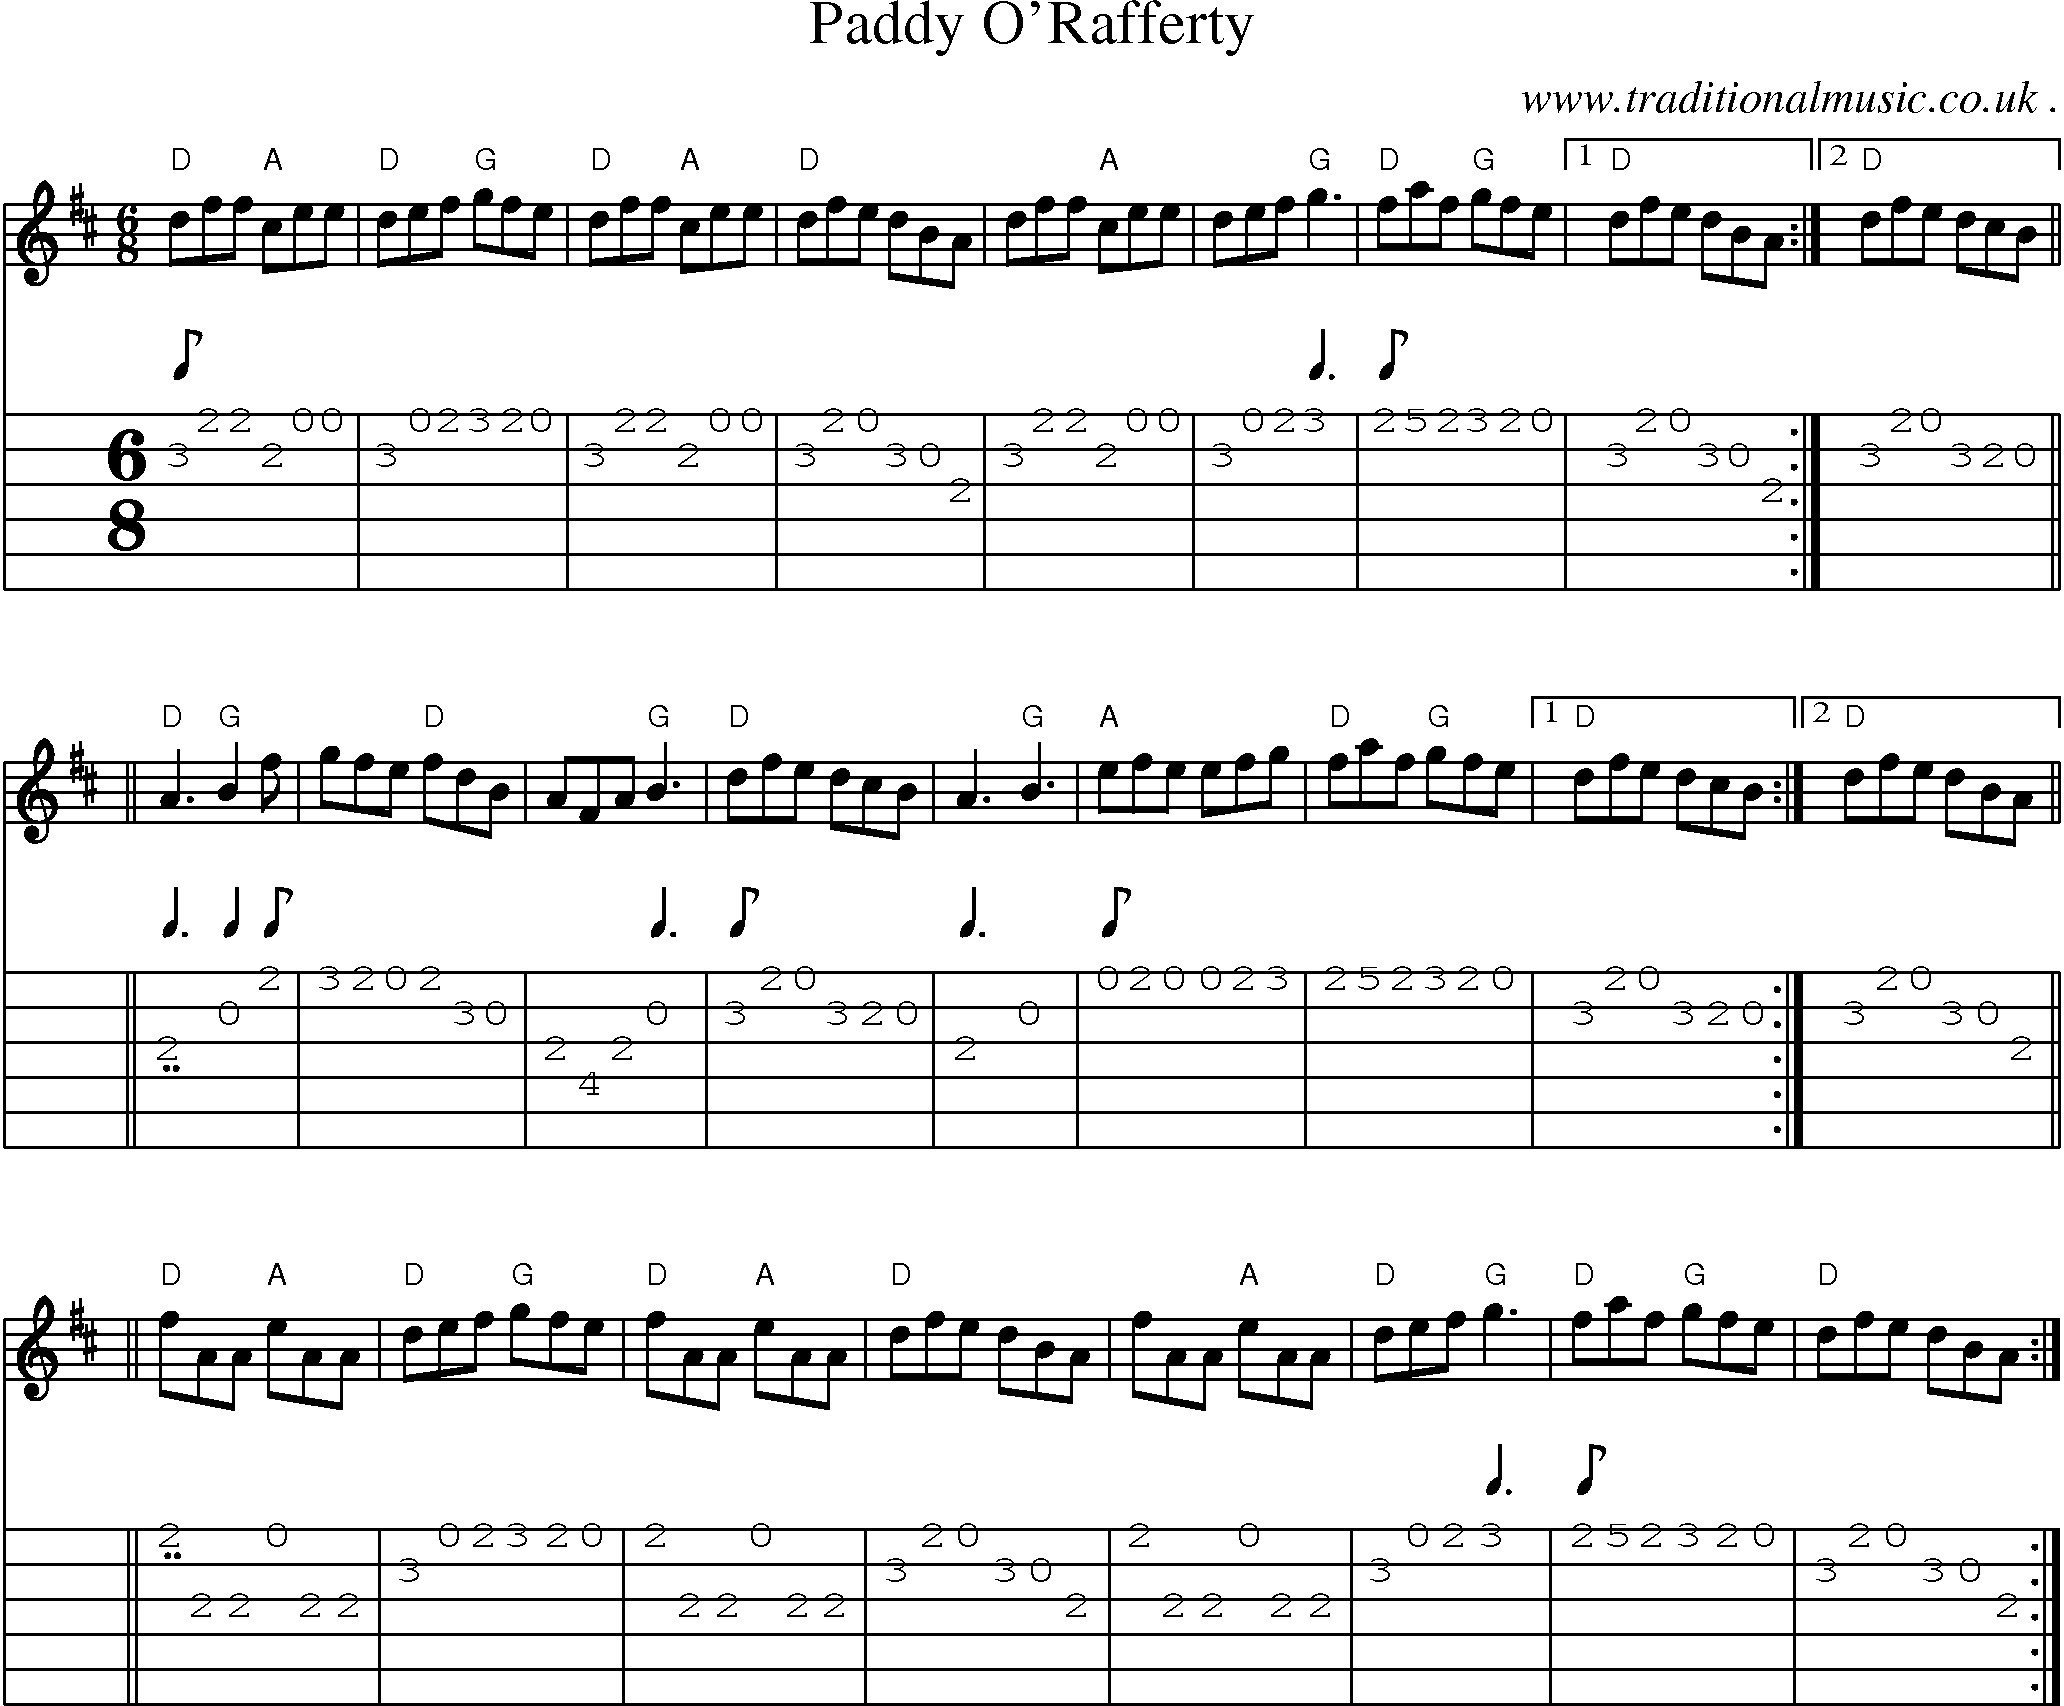 Music Score and Guitar Tabs for Paddy Orafferty